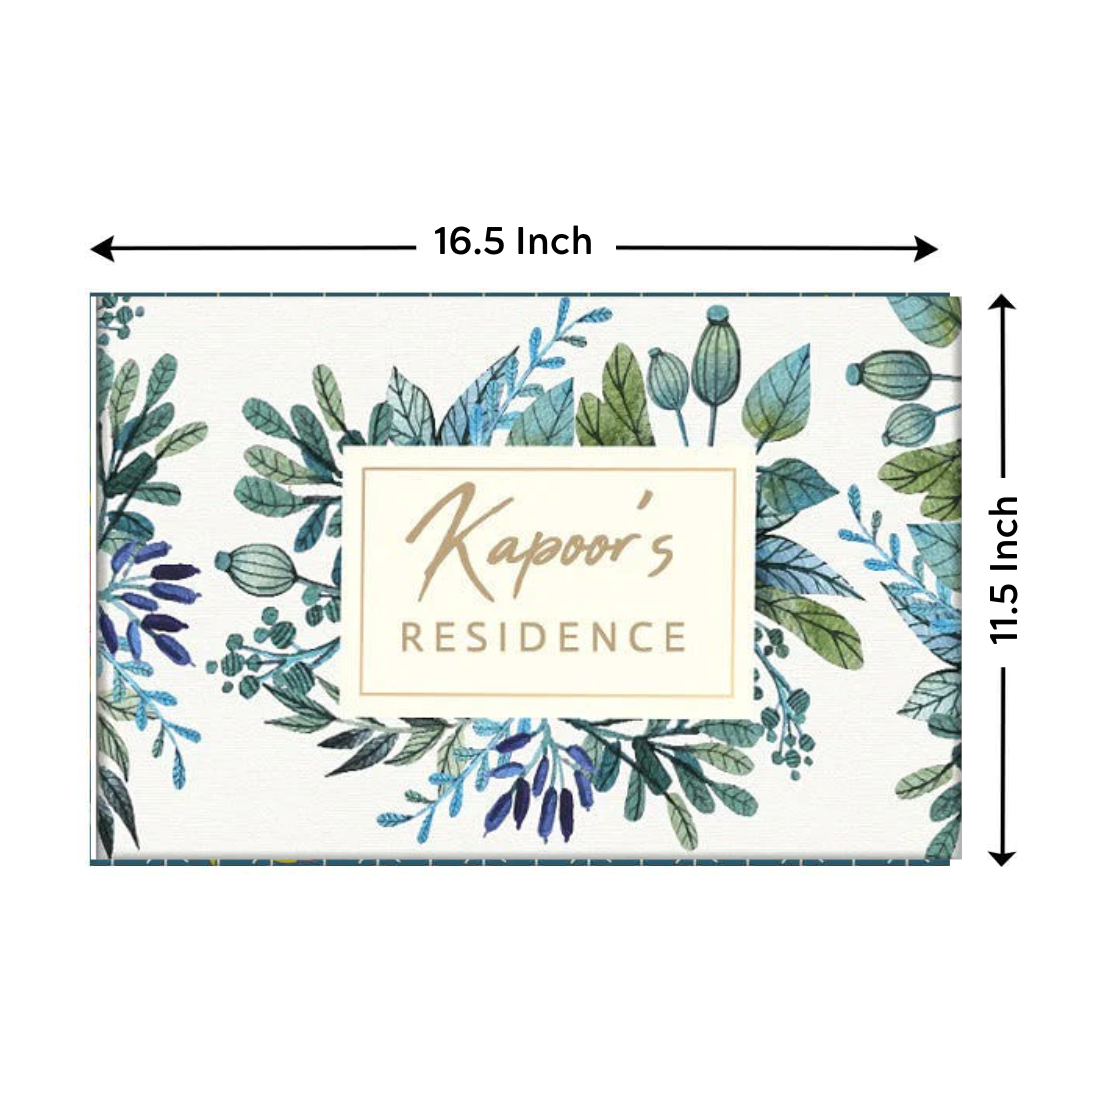 Personalized Door Name Plate for Home - Elegant Flowers